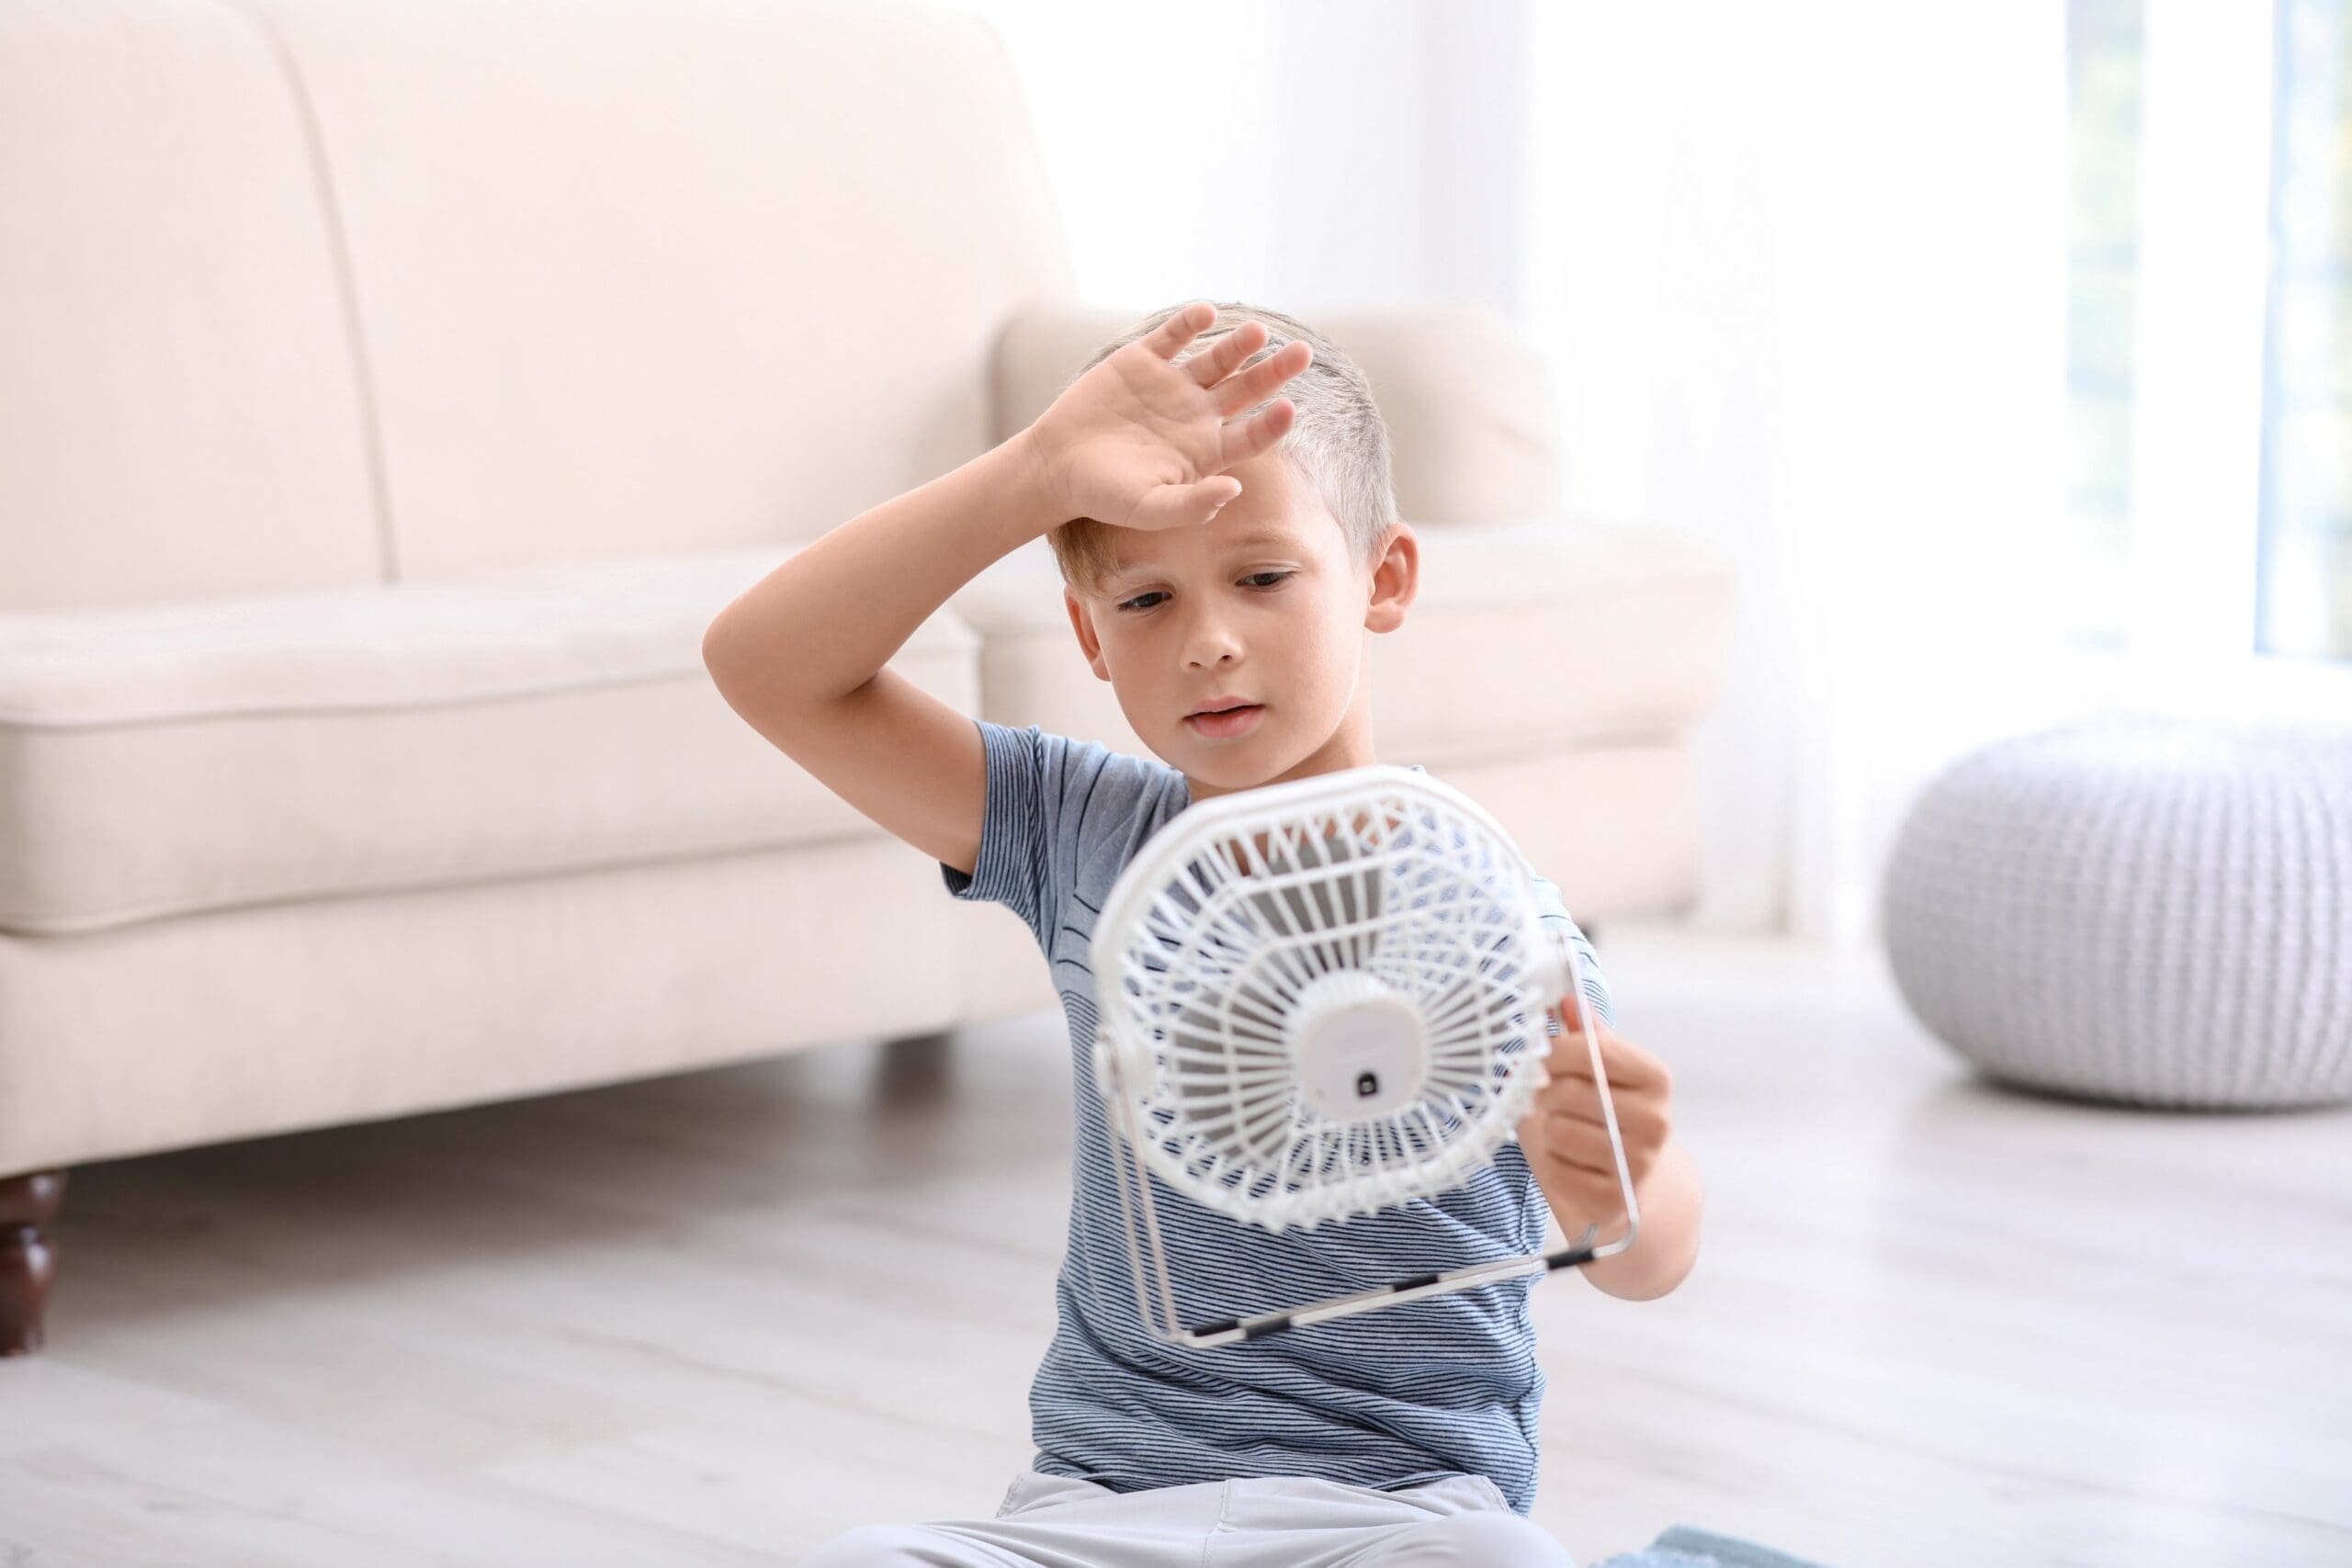 Are our kids too hot to move?